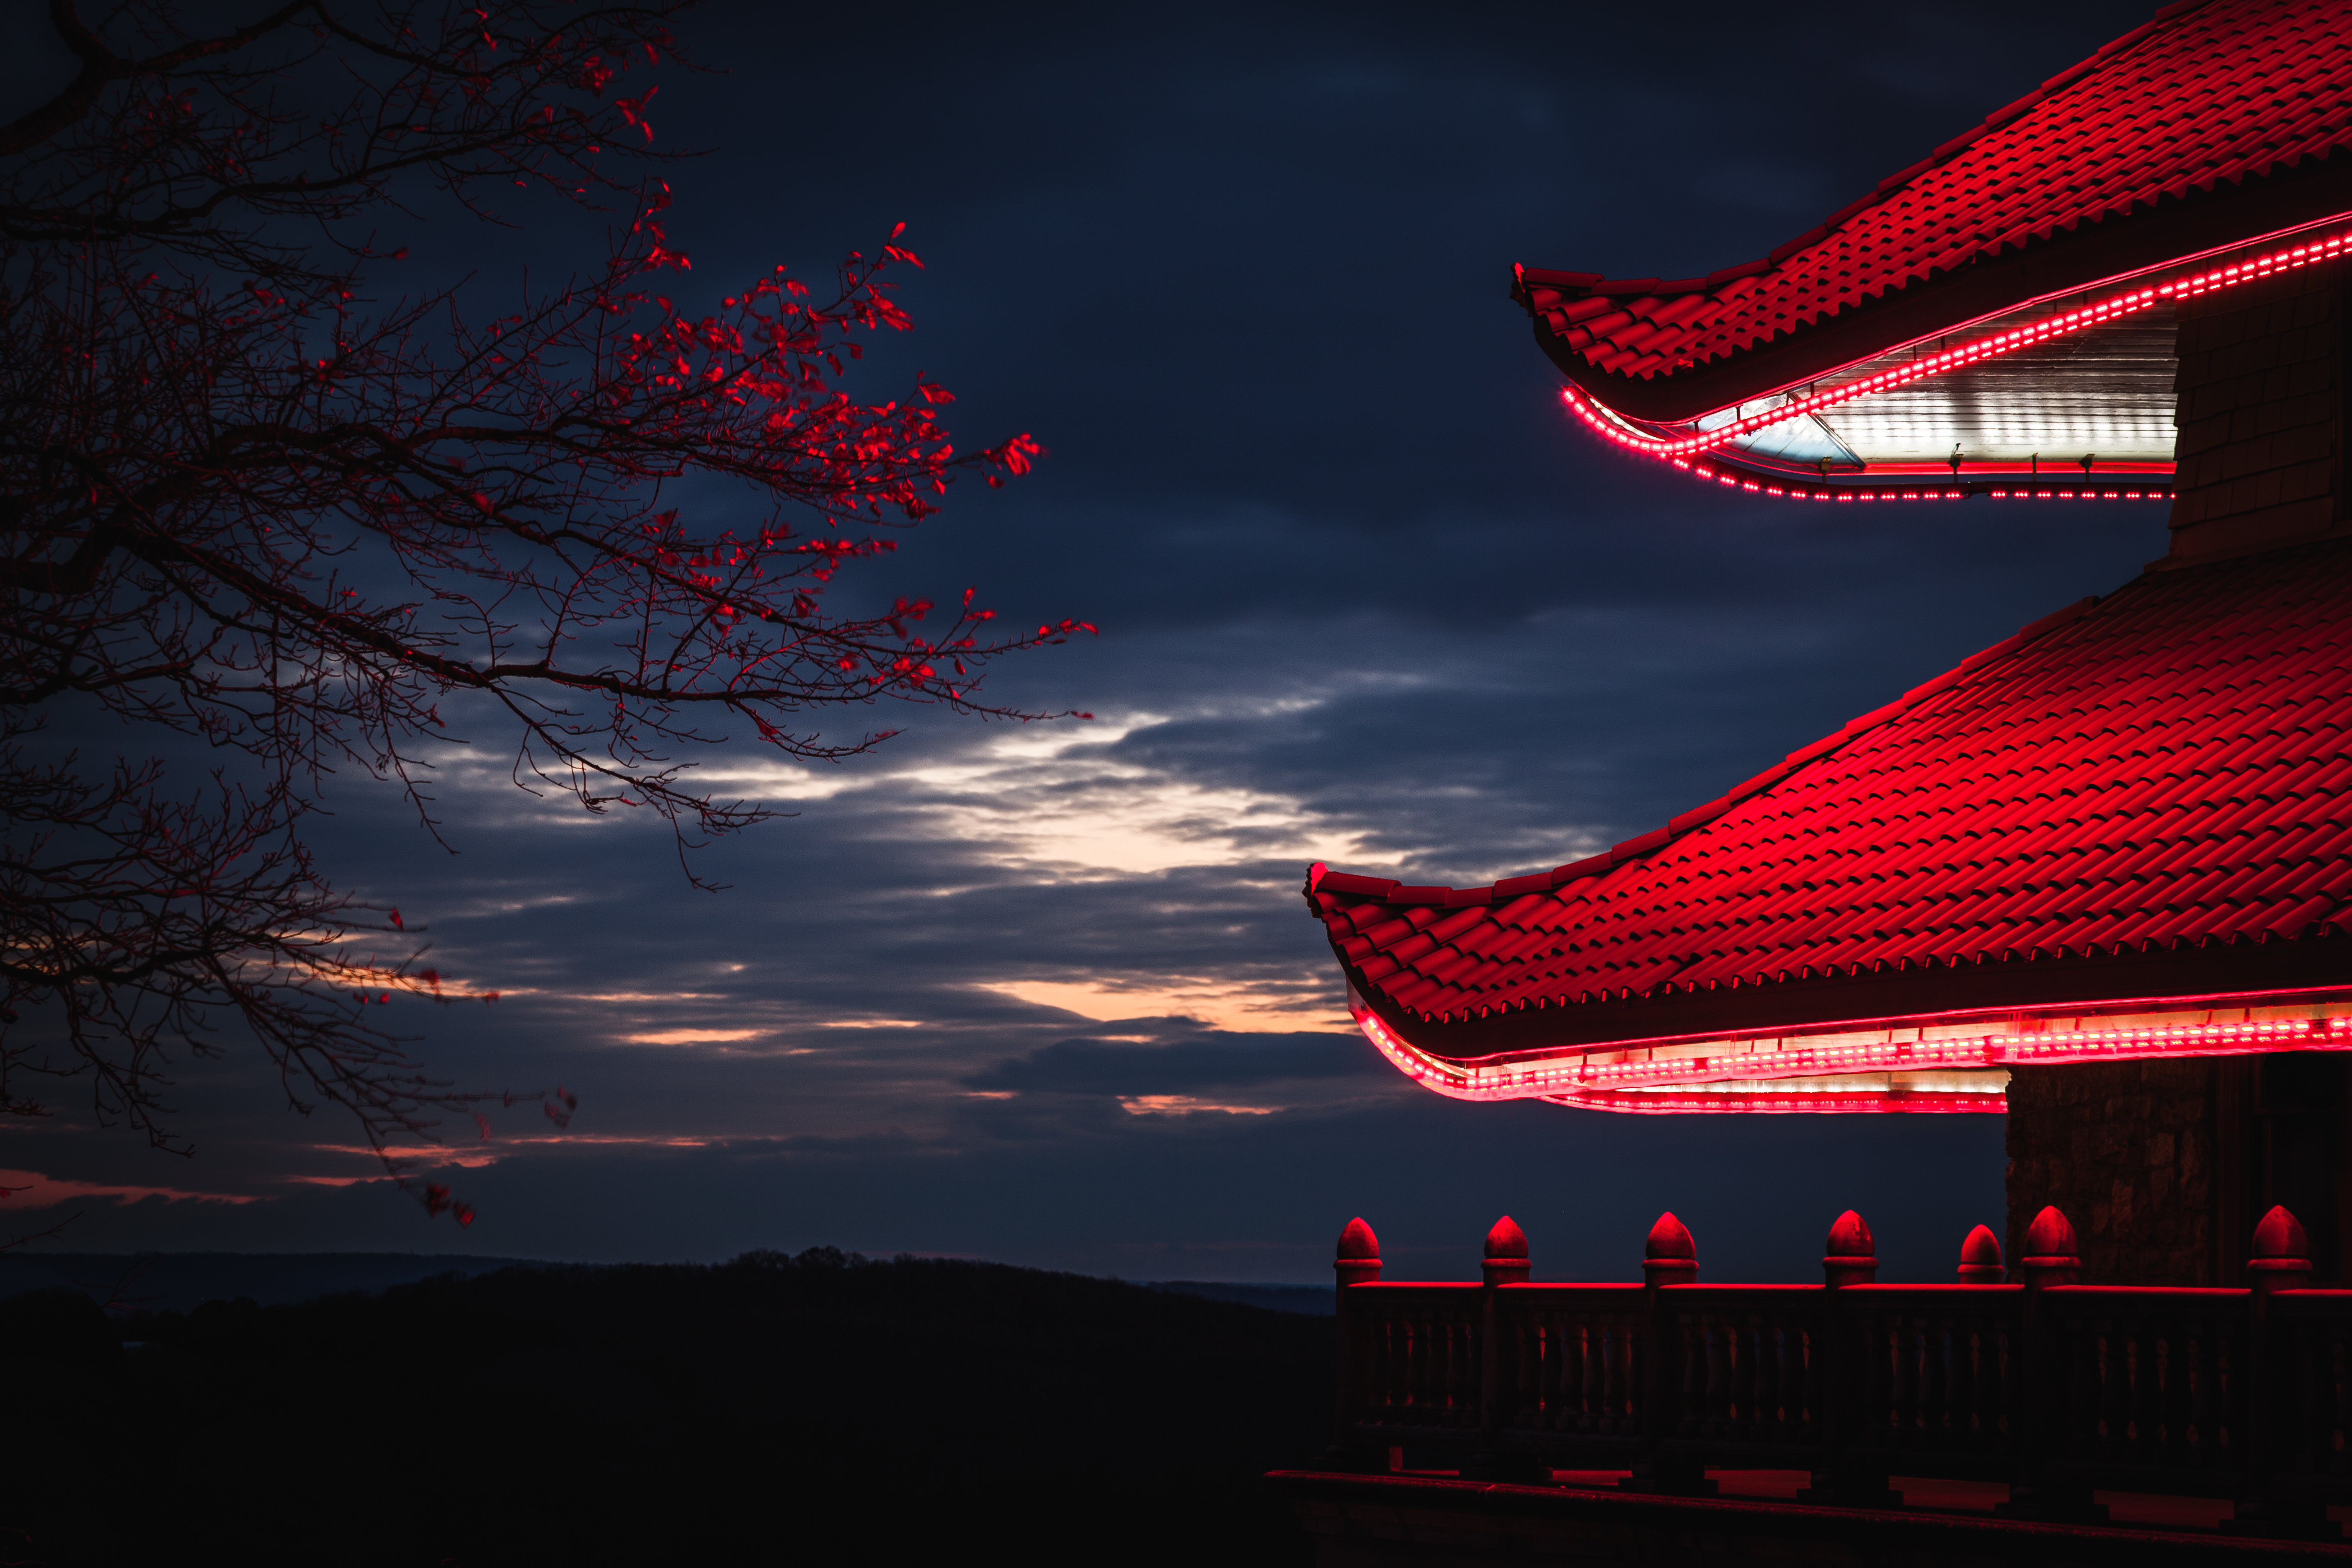 Wallpaper, sunset, night, architecture, red, reading, evening, atmosphere, Japanese, dusk, pagoda, artificial, midnight, Pennsylvania, light, tree, bluehour, dawn, darkness, computer wallpaper 5616x3744